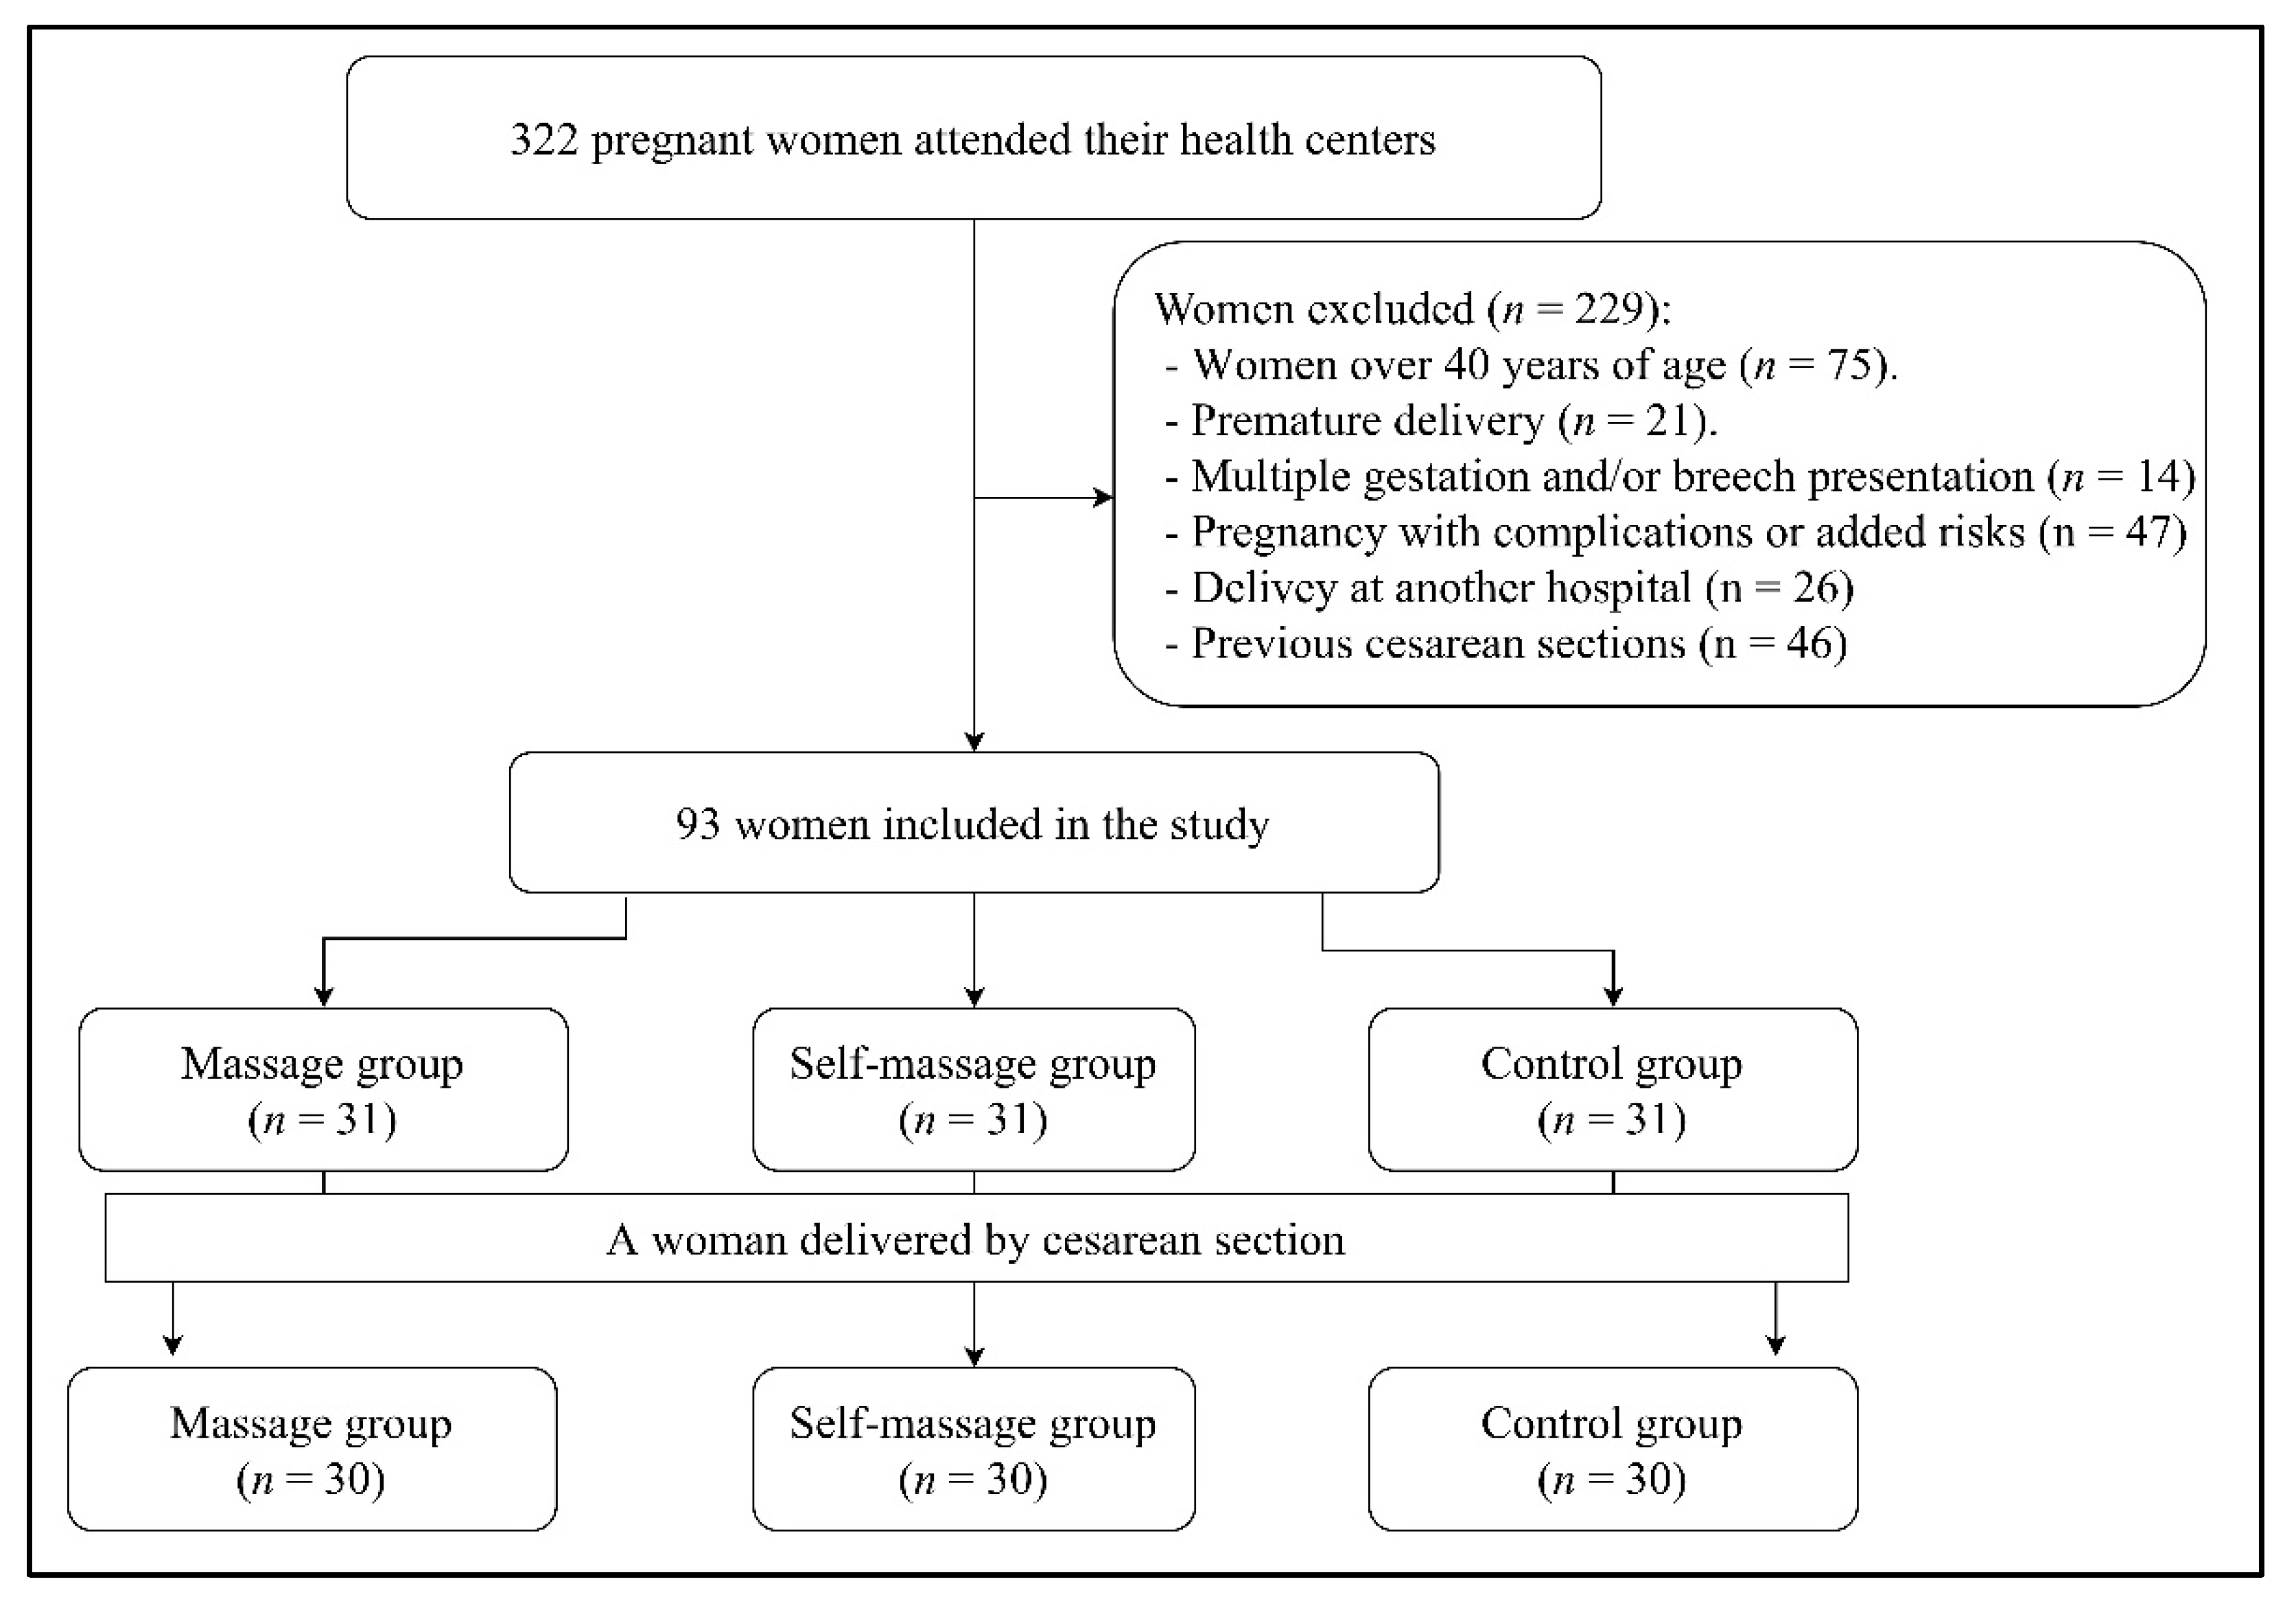 JCM | Free Full-Text | Prevalence of Perineal Tear Peripartum after Two  Antepartum Perineal Massage Techniques: A Non-Randomised Controlled Trial |  HTML